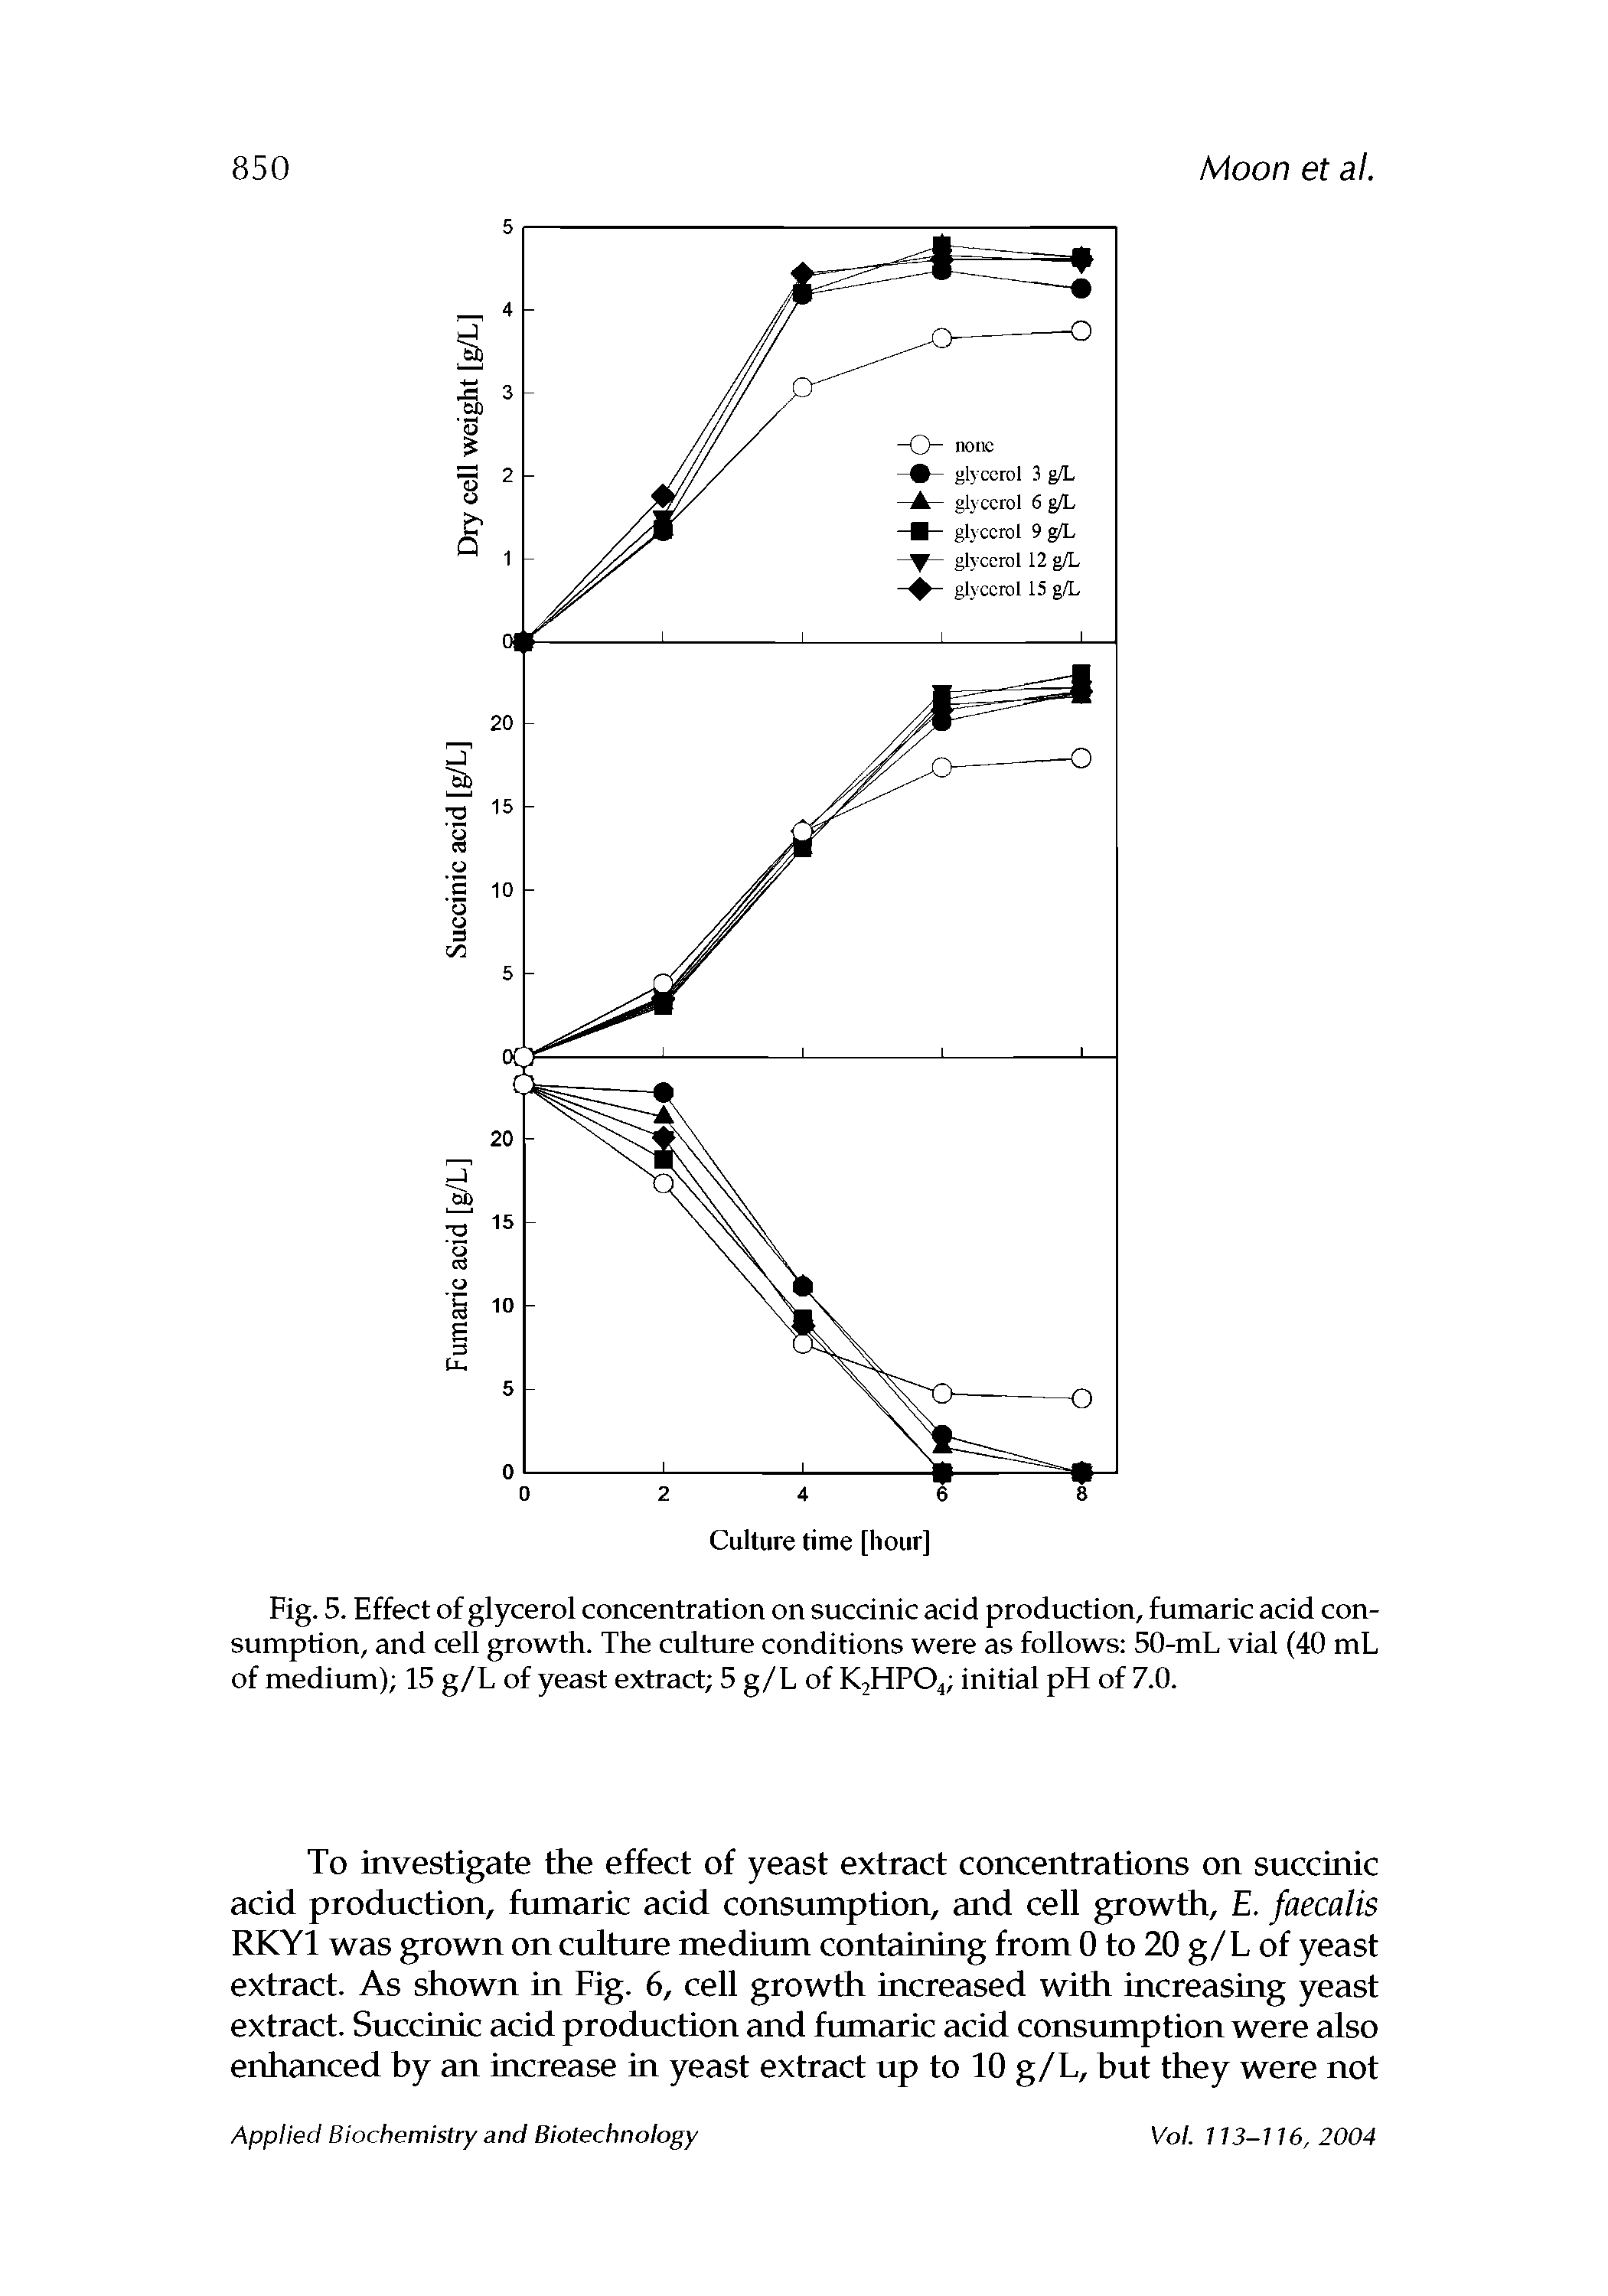 Fig. 5. Effect of glycerol concentration on succinic acid production, fumaric acid consumption, and cell growth. The culture conditions were as follows 50-mL vial (40 mL of medium) 15 g/L of yeast extract 5 g/L of K2HP04 initial pH of 7.0.